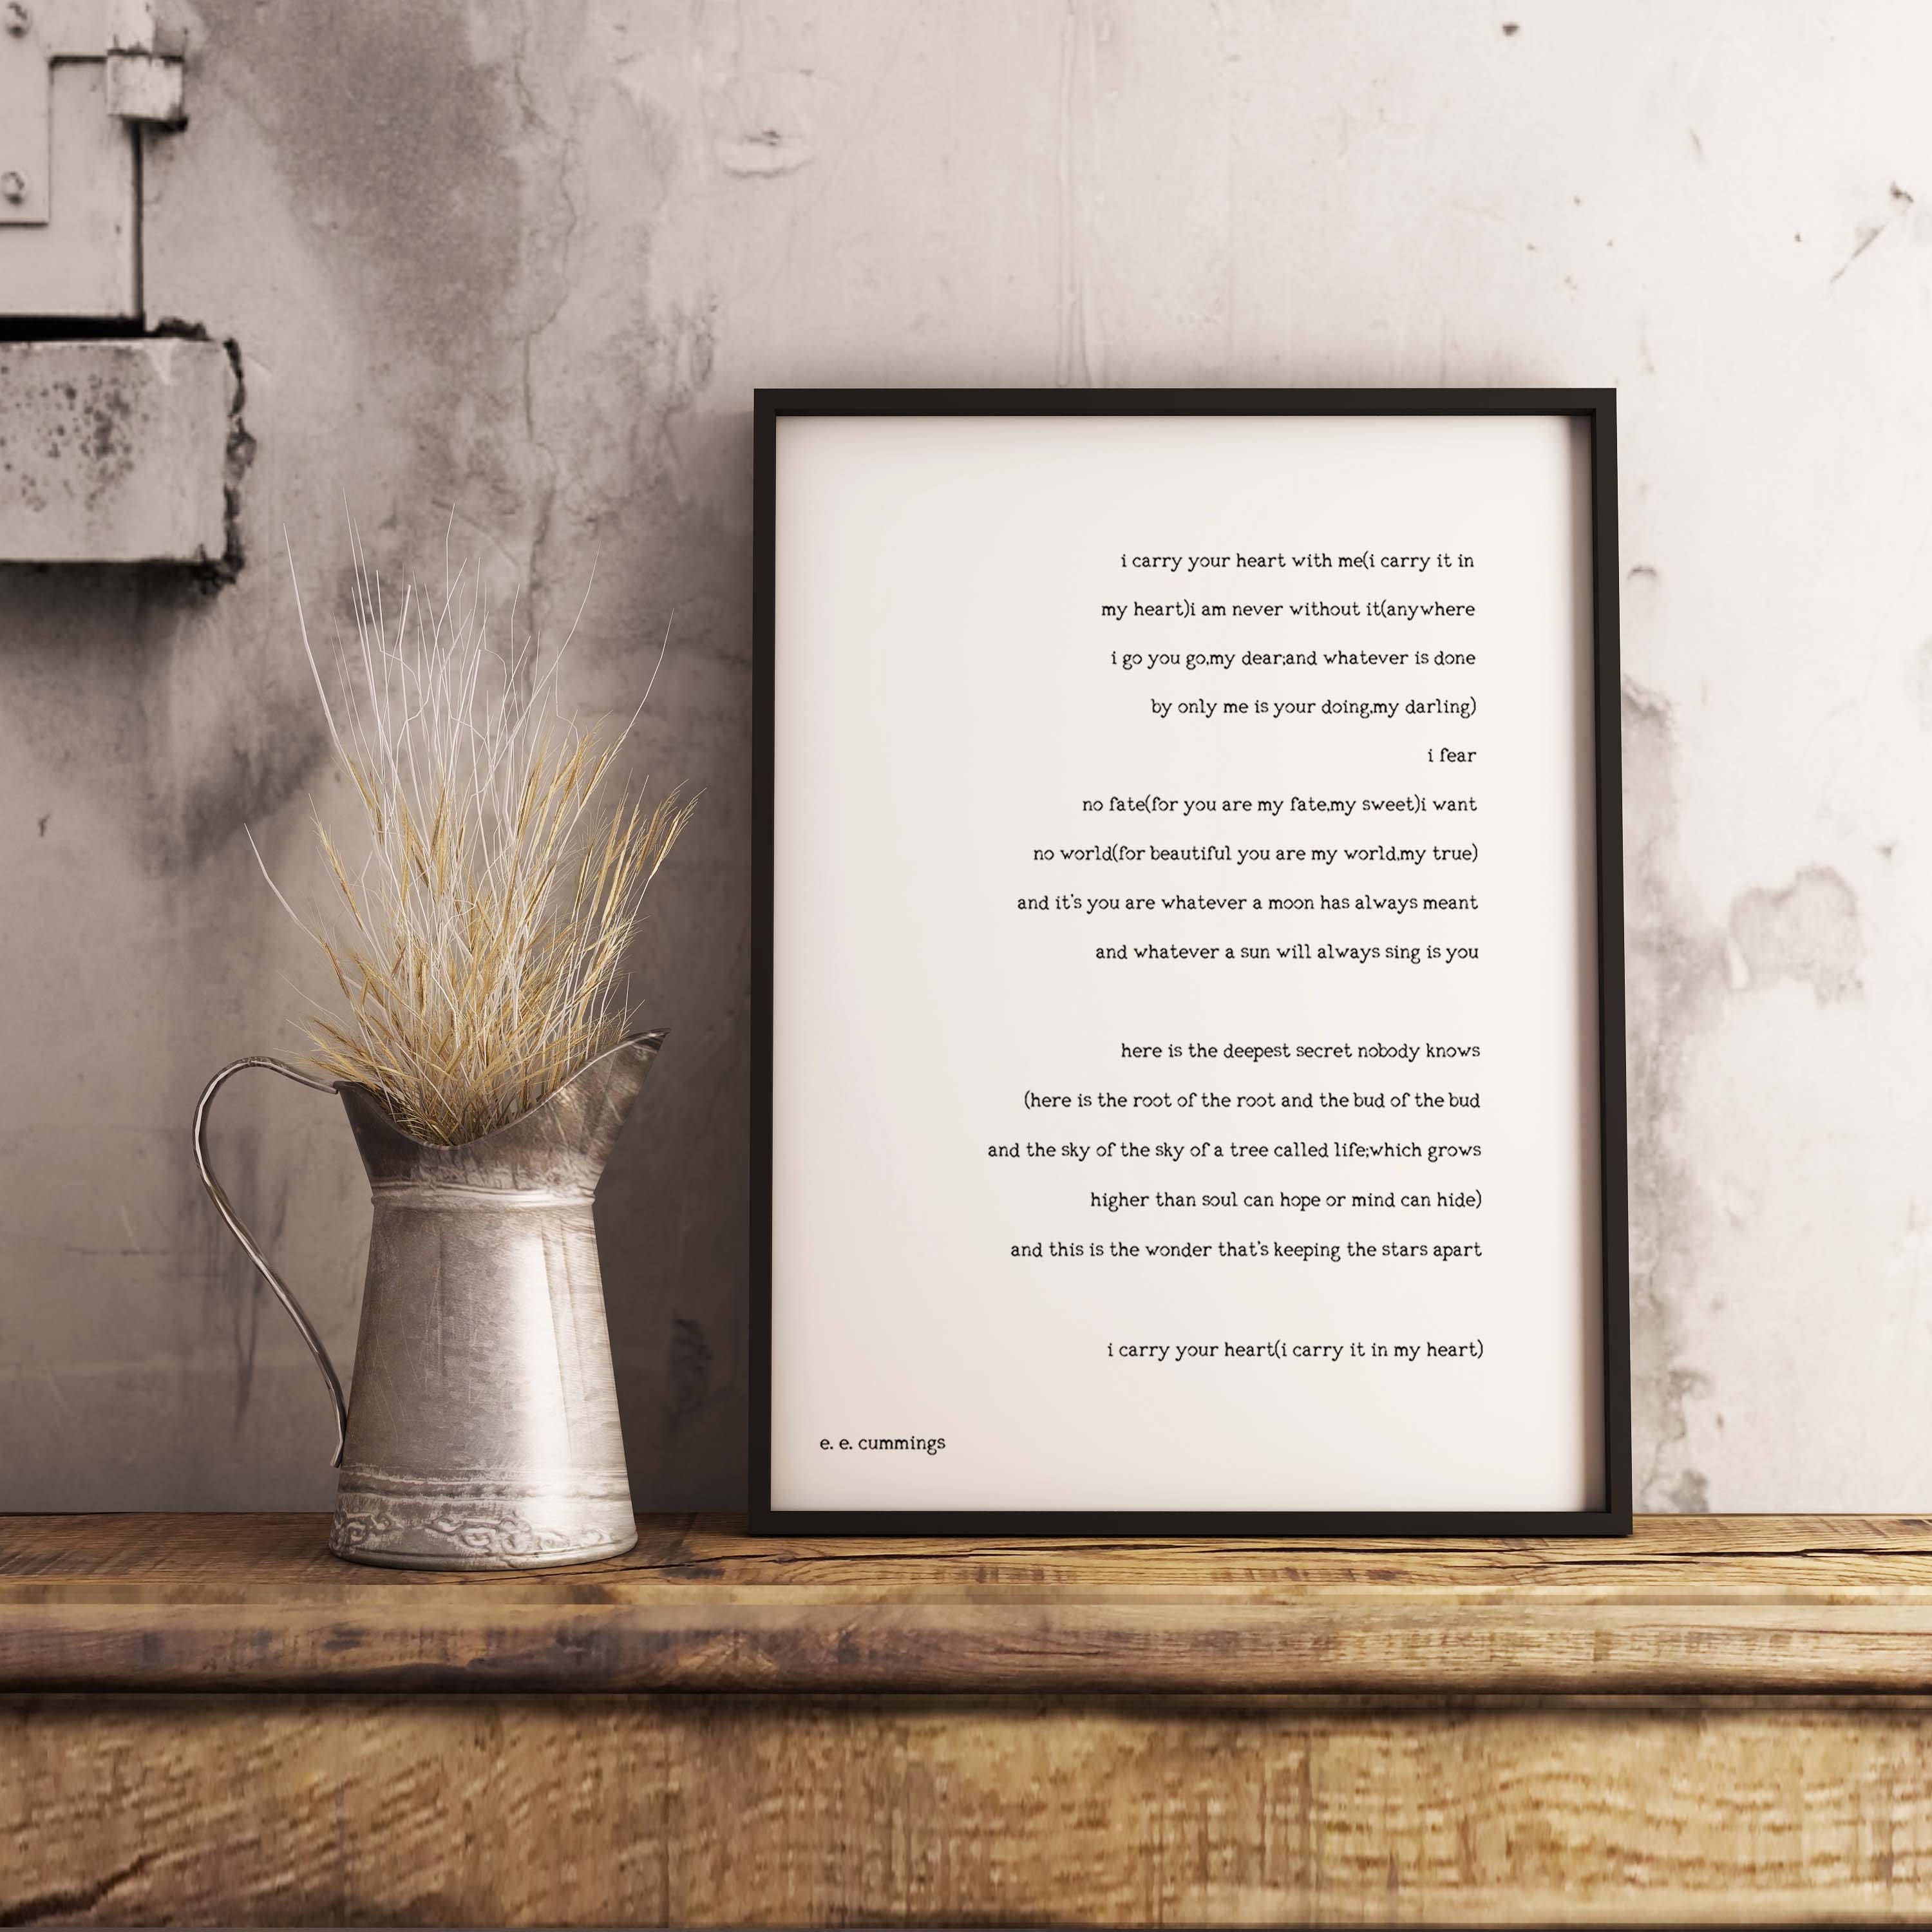 I carry your heart FRAMED Print - ee cummings Wall Art Prints, Bedroom Decor Or Wedding Poem Print in Black & White